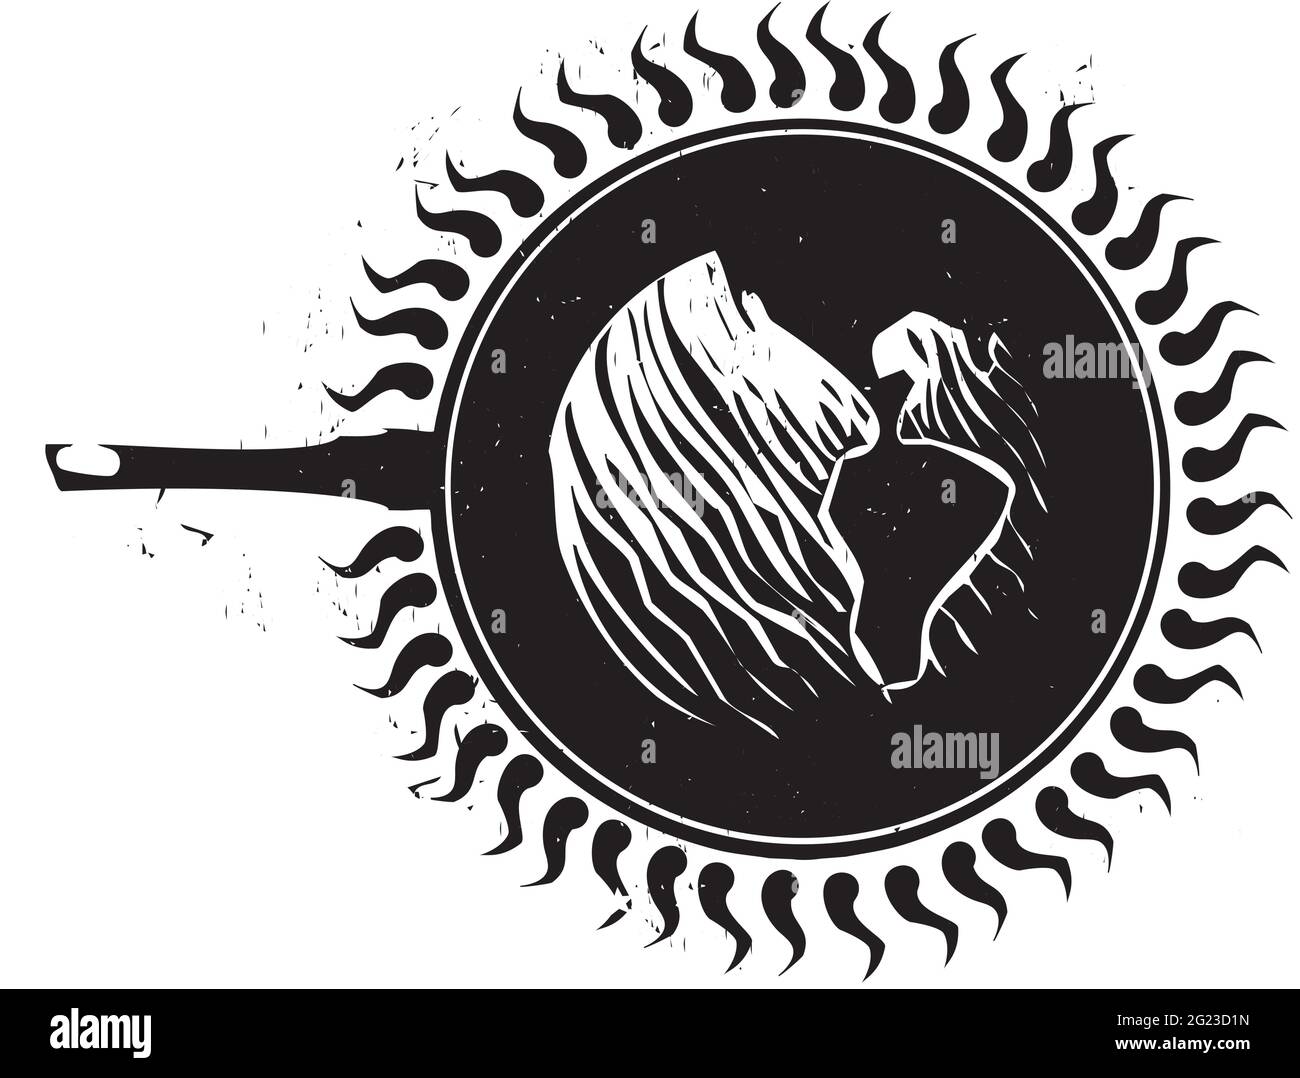 Woodcut frying Earth in a pan climate issue image Stock Vector